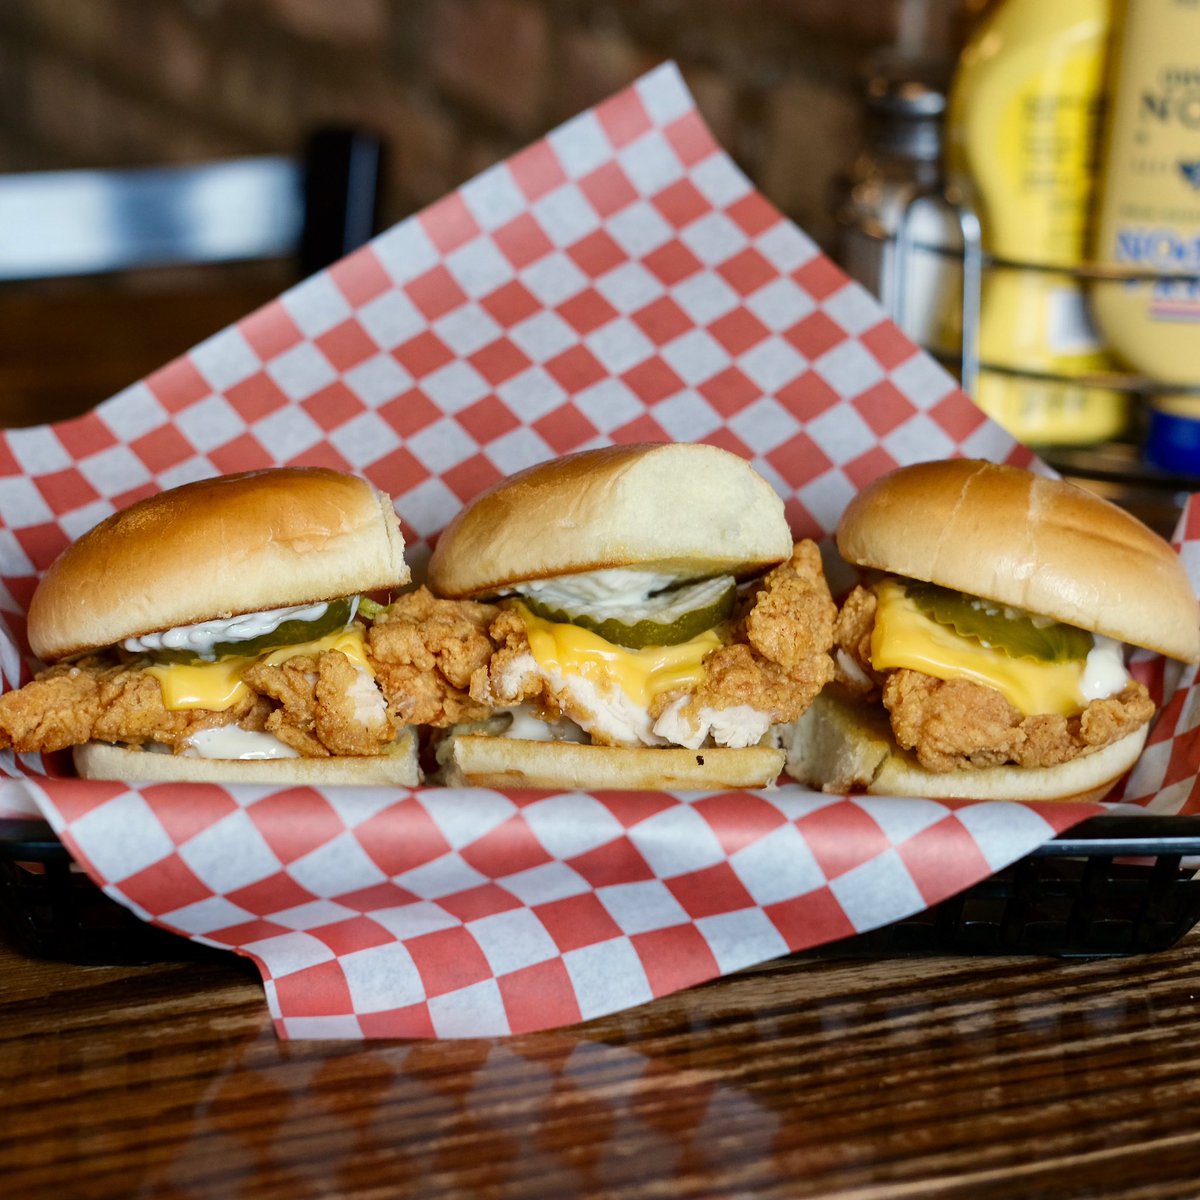 Fried Chicken Sliders on a Friday. YUM! 😋 

Open today at 11am. Pickup & Delivery available. Call for pickup: (773) 661-1573. View menu & delivery at beckschicago.com

#chicagobars #lincolnpark #lincolnparkchicago #chicagoeats #chicagofood #chicagosbest #eeeeeats